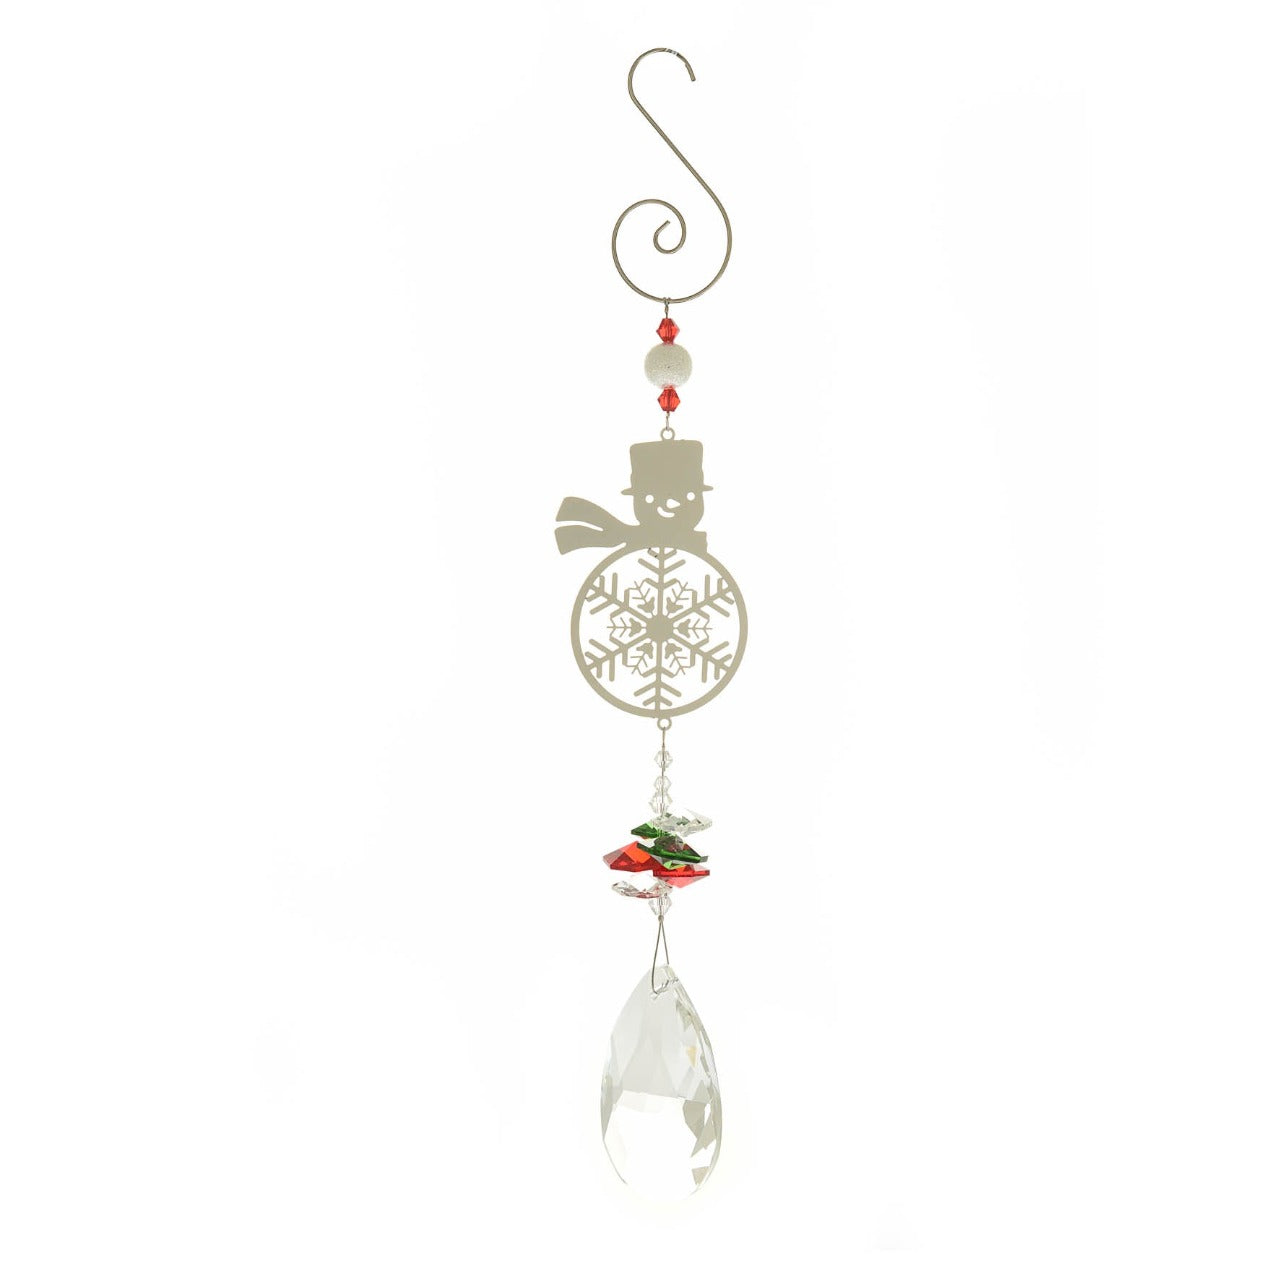 Christmas Crystal Metal Tree Hanging Decoration - Snowman  This crystal tree hanging decoration would be a beautiful addition to any tree this year. With a delicate snowman design, a crystal feature, and a gorgeous red gift box, this is sure to bring a smile to the faces of any friends or family this year.